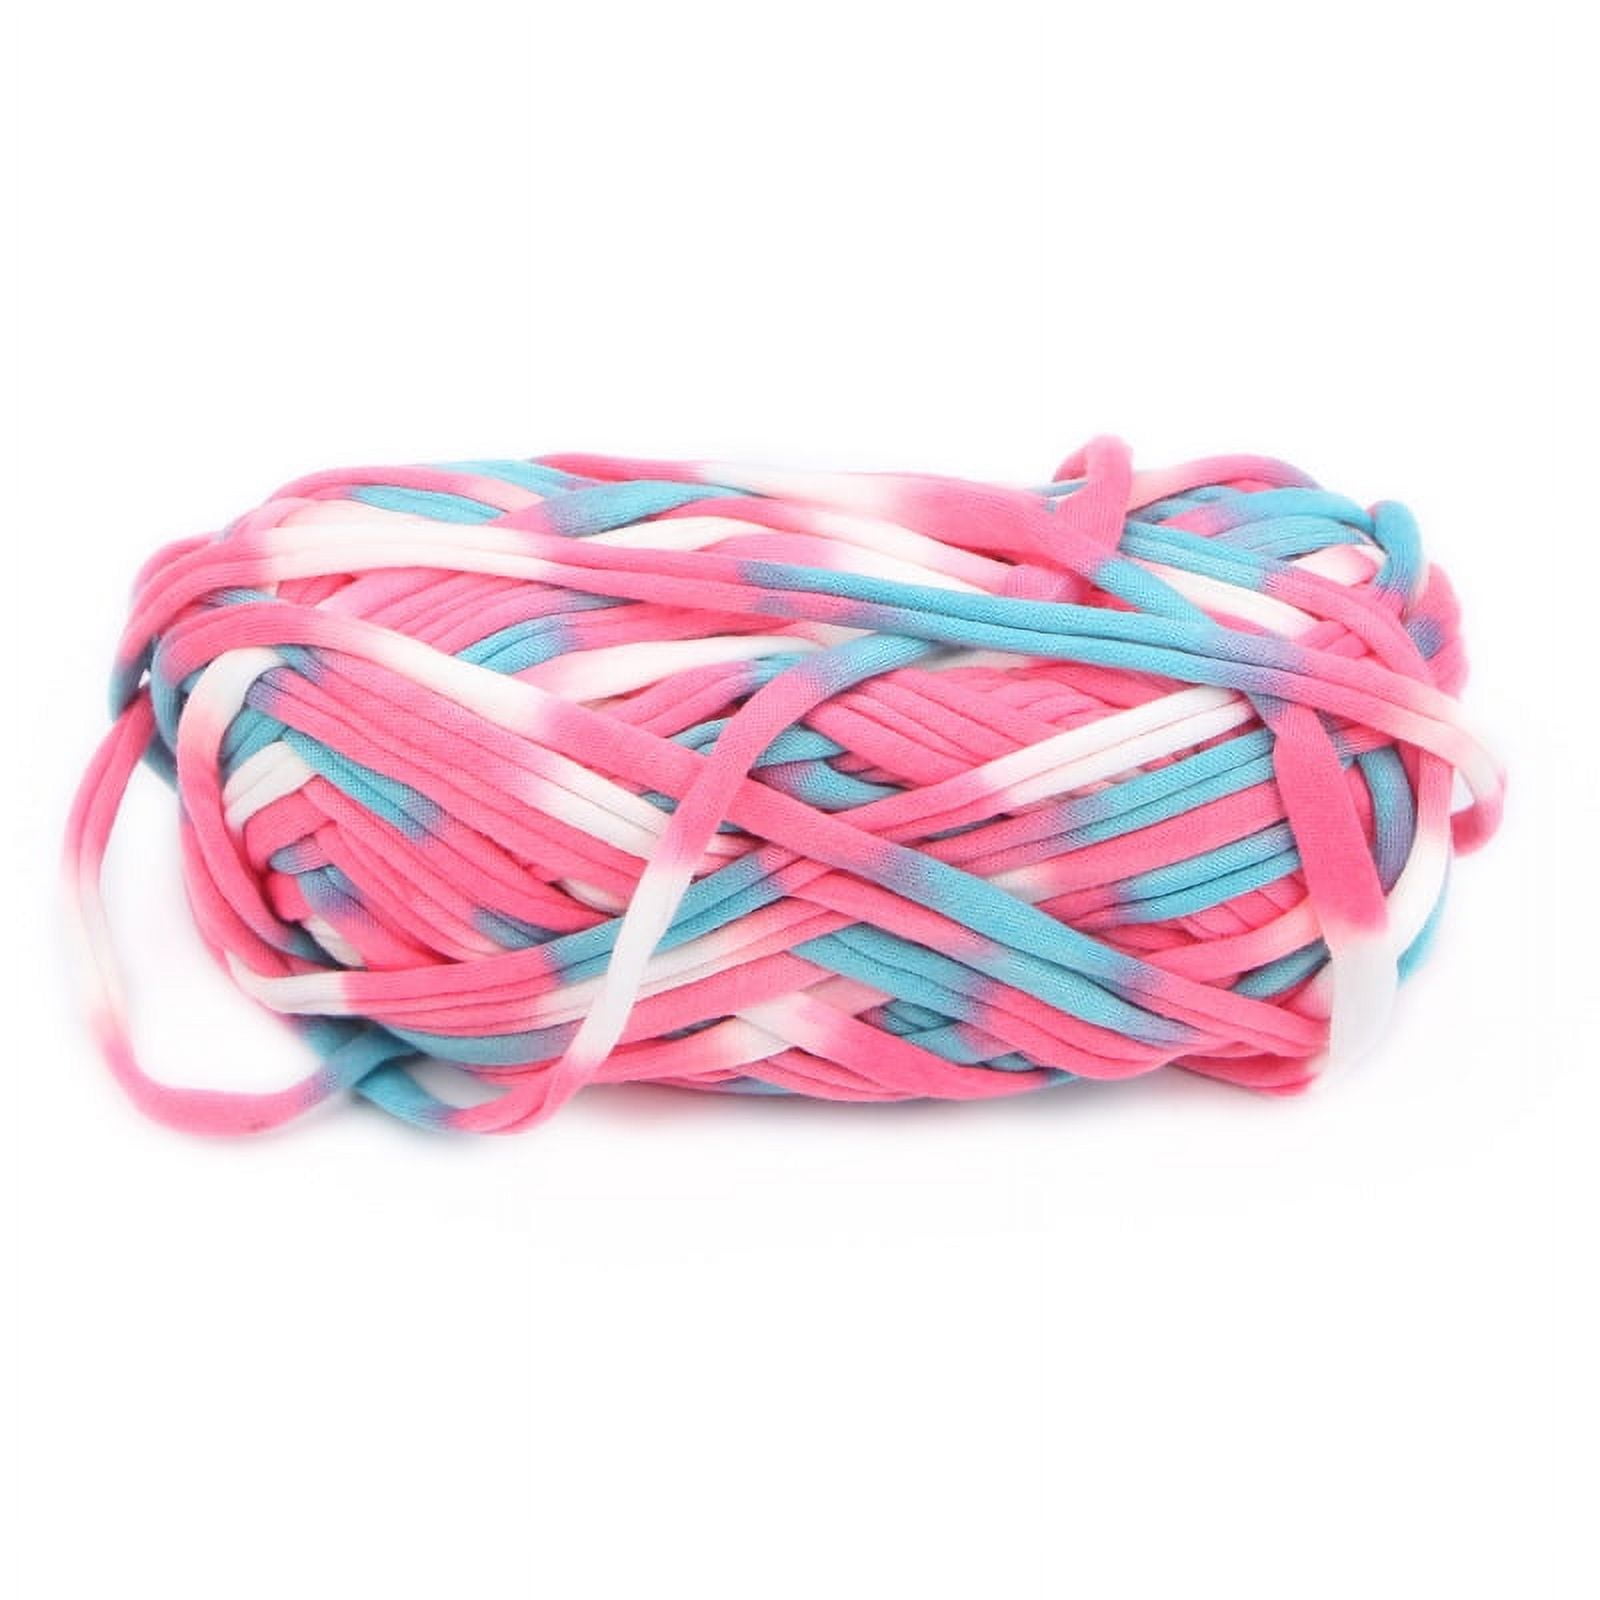 T-shirt yarn for crocheting baskets, bags, rugs and home decor. Pink –  Knitznpurlz